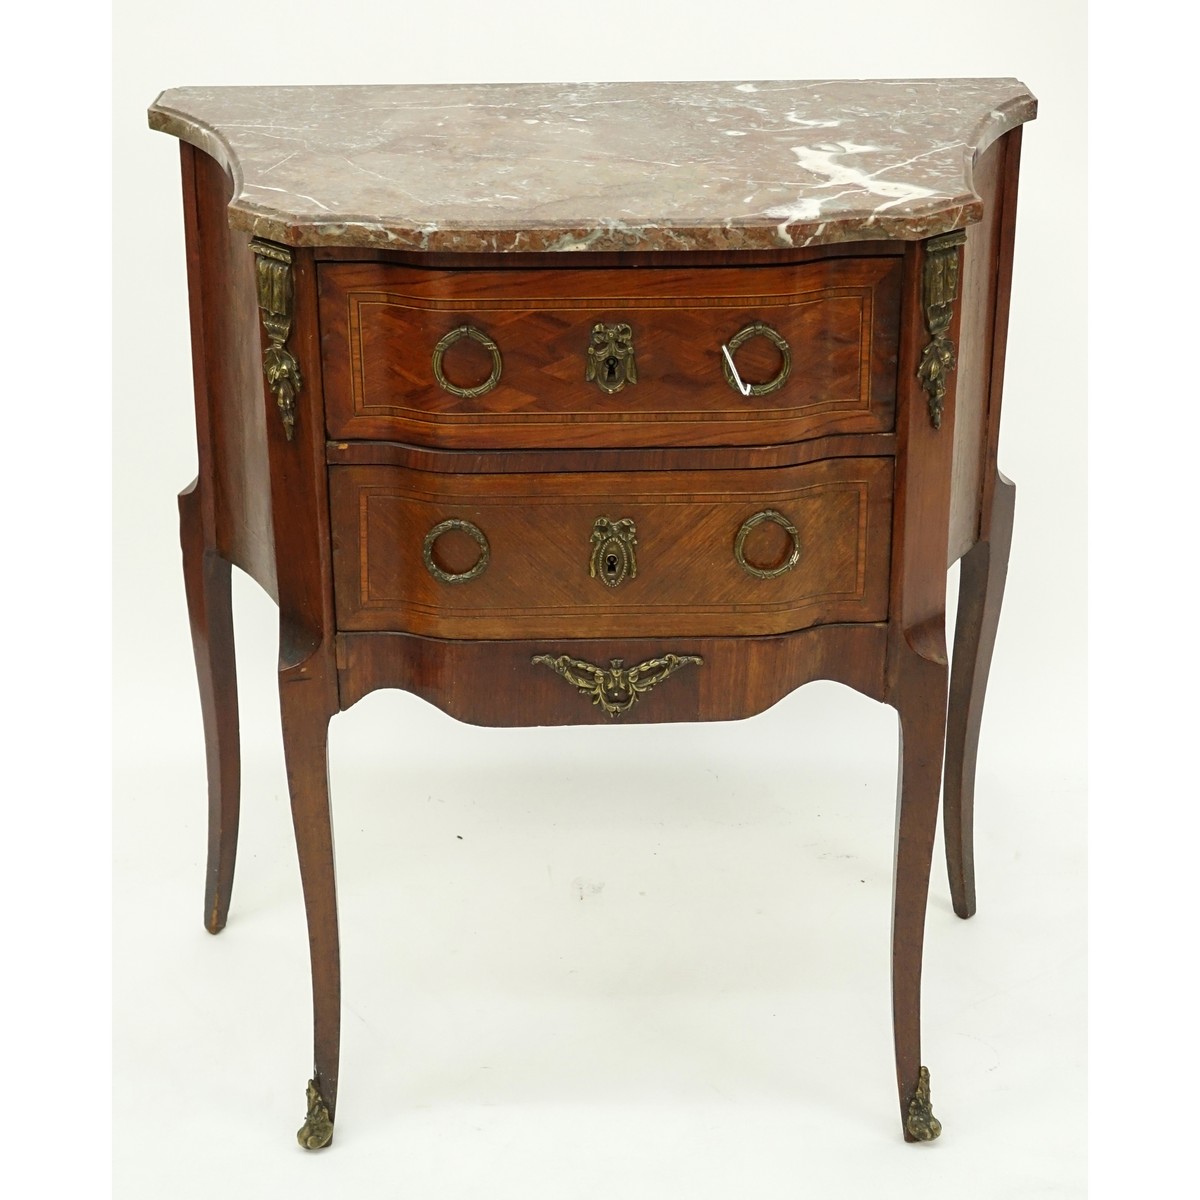 Early 20th Century Parquetry Inlaid Marble Top Commode with Bronze Mounts. Two drawers and stands on high cabriole legs.